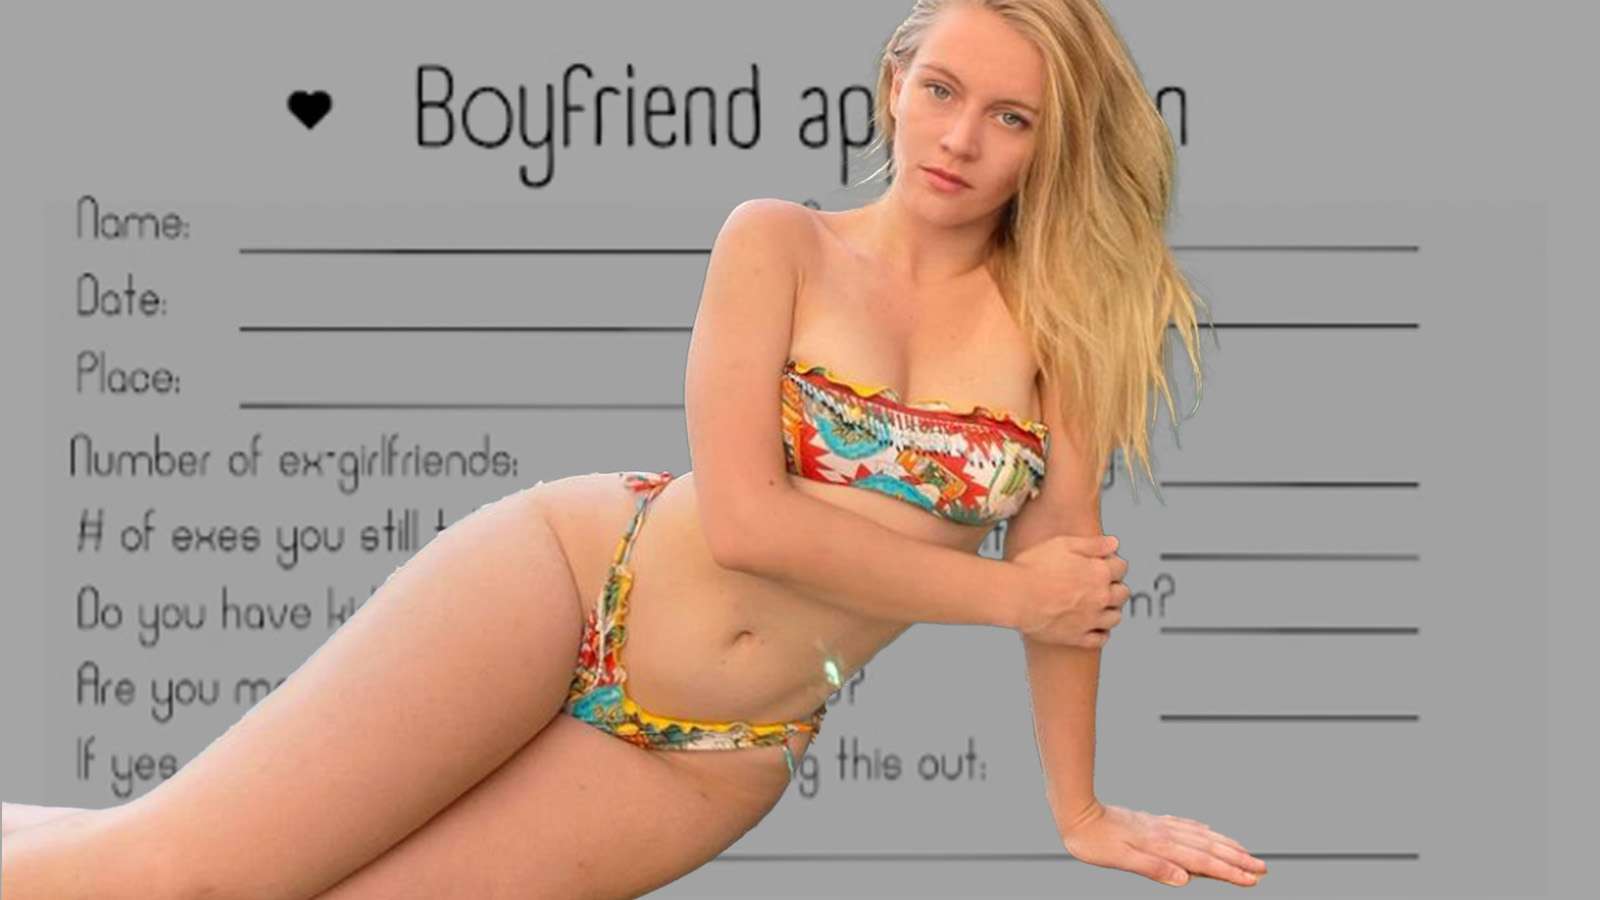 Instagram model’s boyfriend application attracts 3000 hopeful candidates within 24 hours